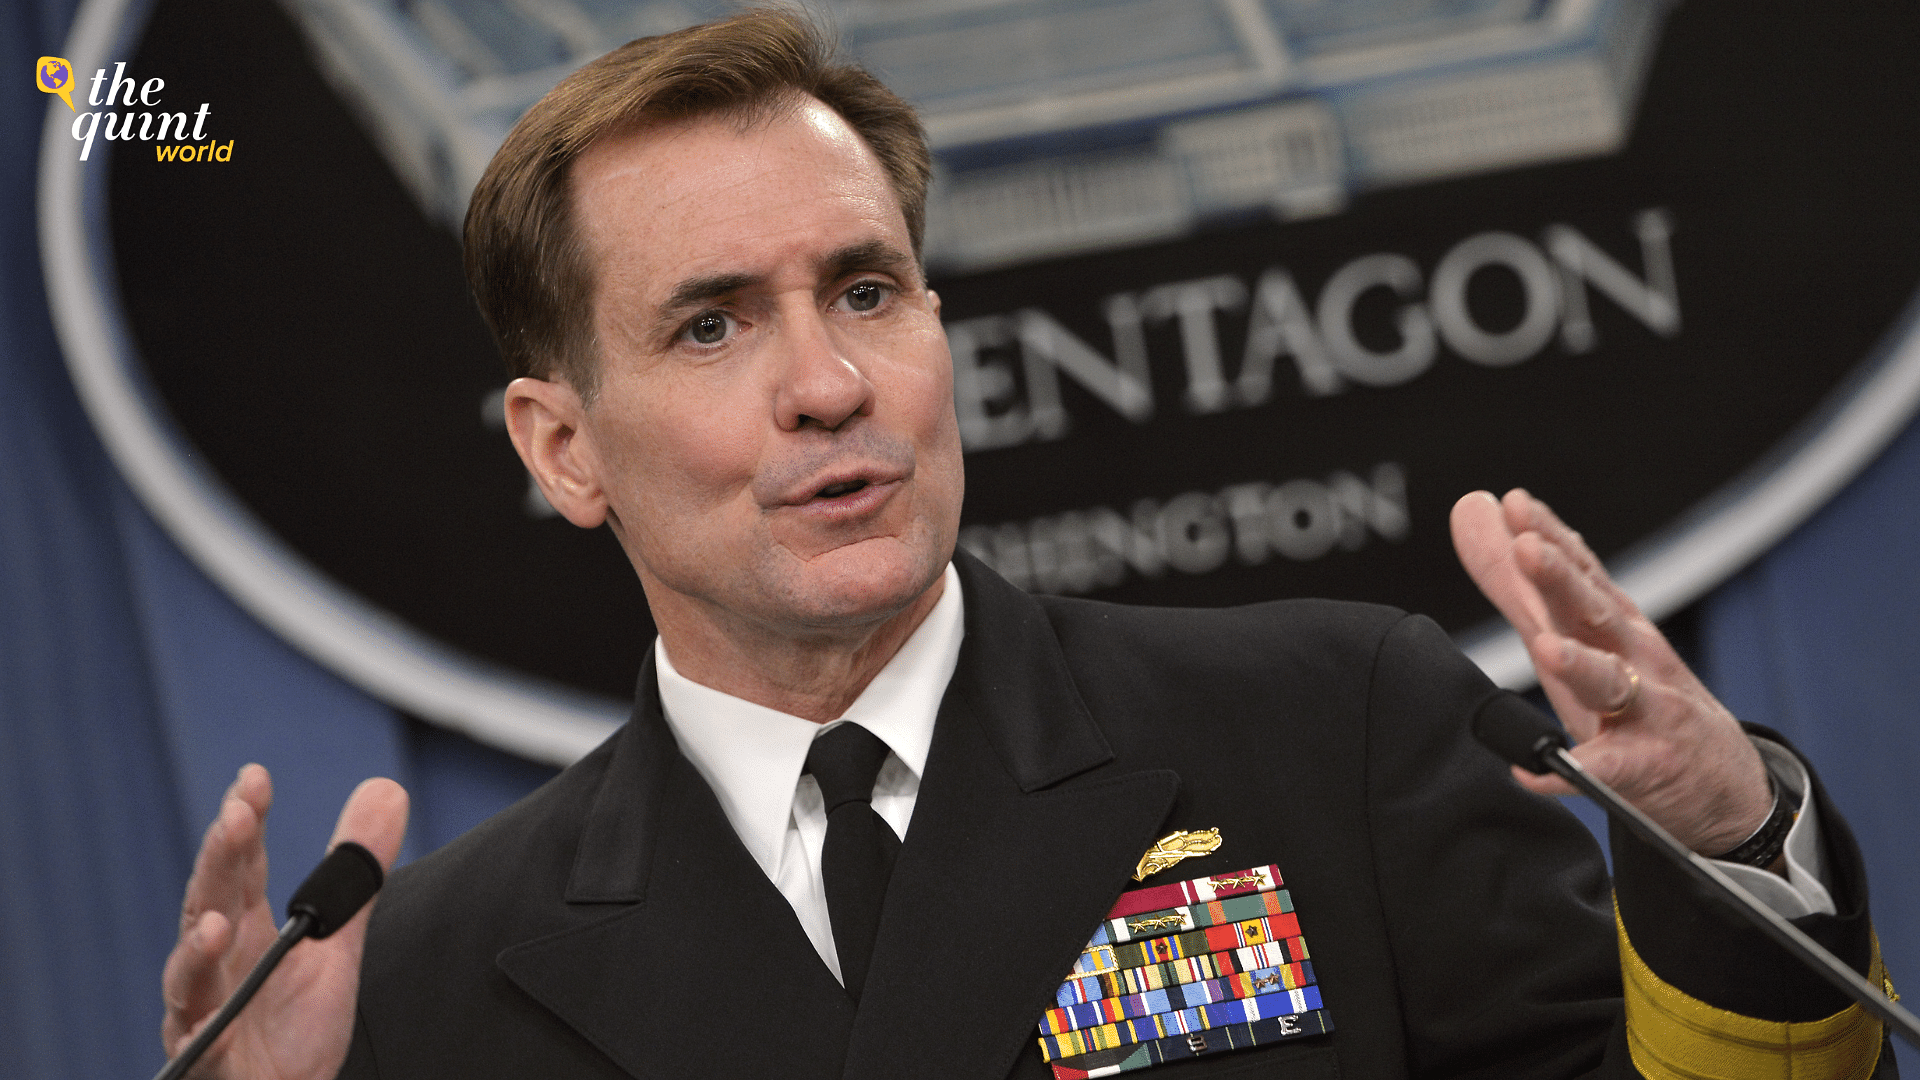 <div class="paragraphs"><p>Coordinator for Strategic Communications at the United States National Security Council John Kirby.</p></div>